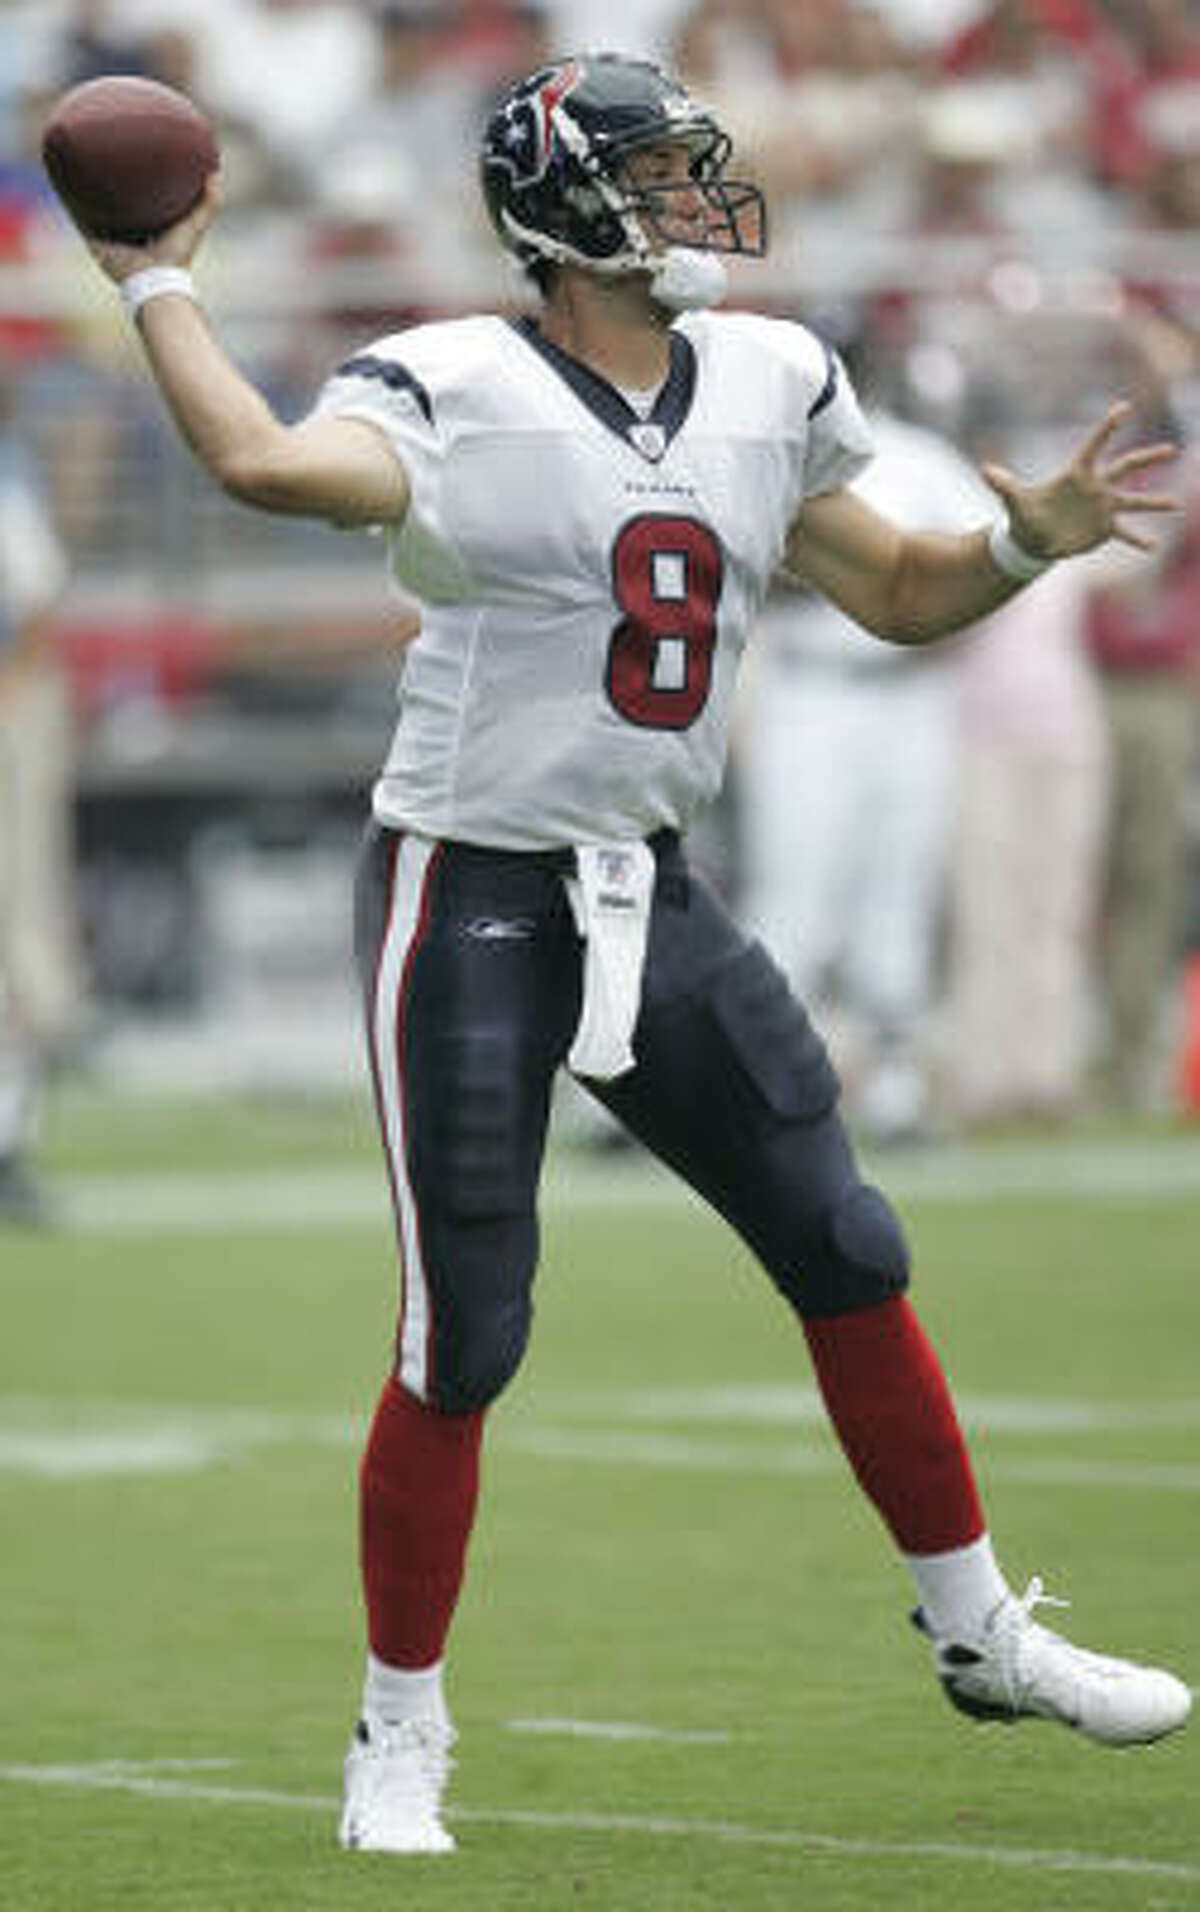 Matt Schaub was 9-of-12 for 108 yards and ran 5 yards for a score in his second preseason game as the Texans' starting quarterback.